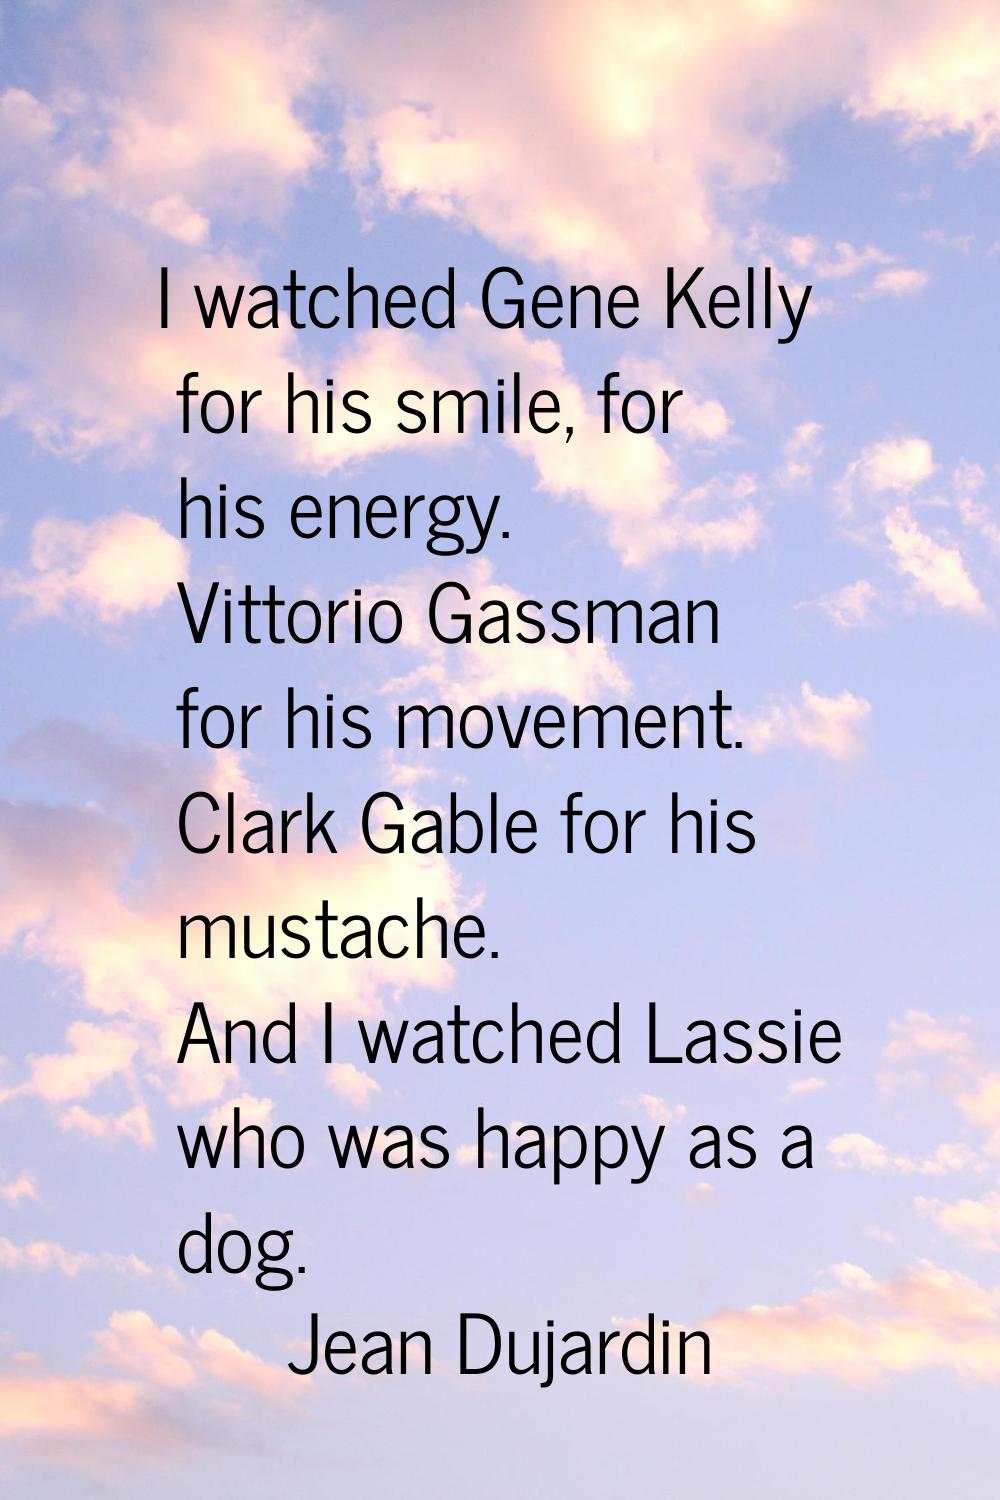 I watched Gene Kelly for his smile, for his energy. Vittorio Gassman for his movement. Clark Gable 